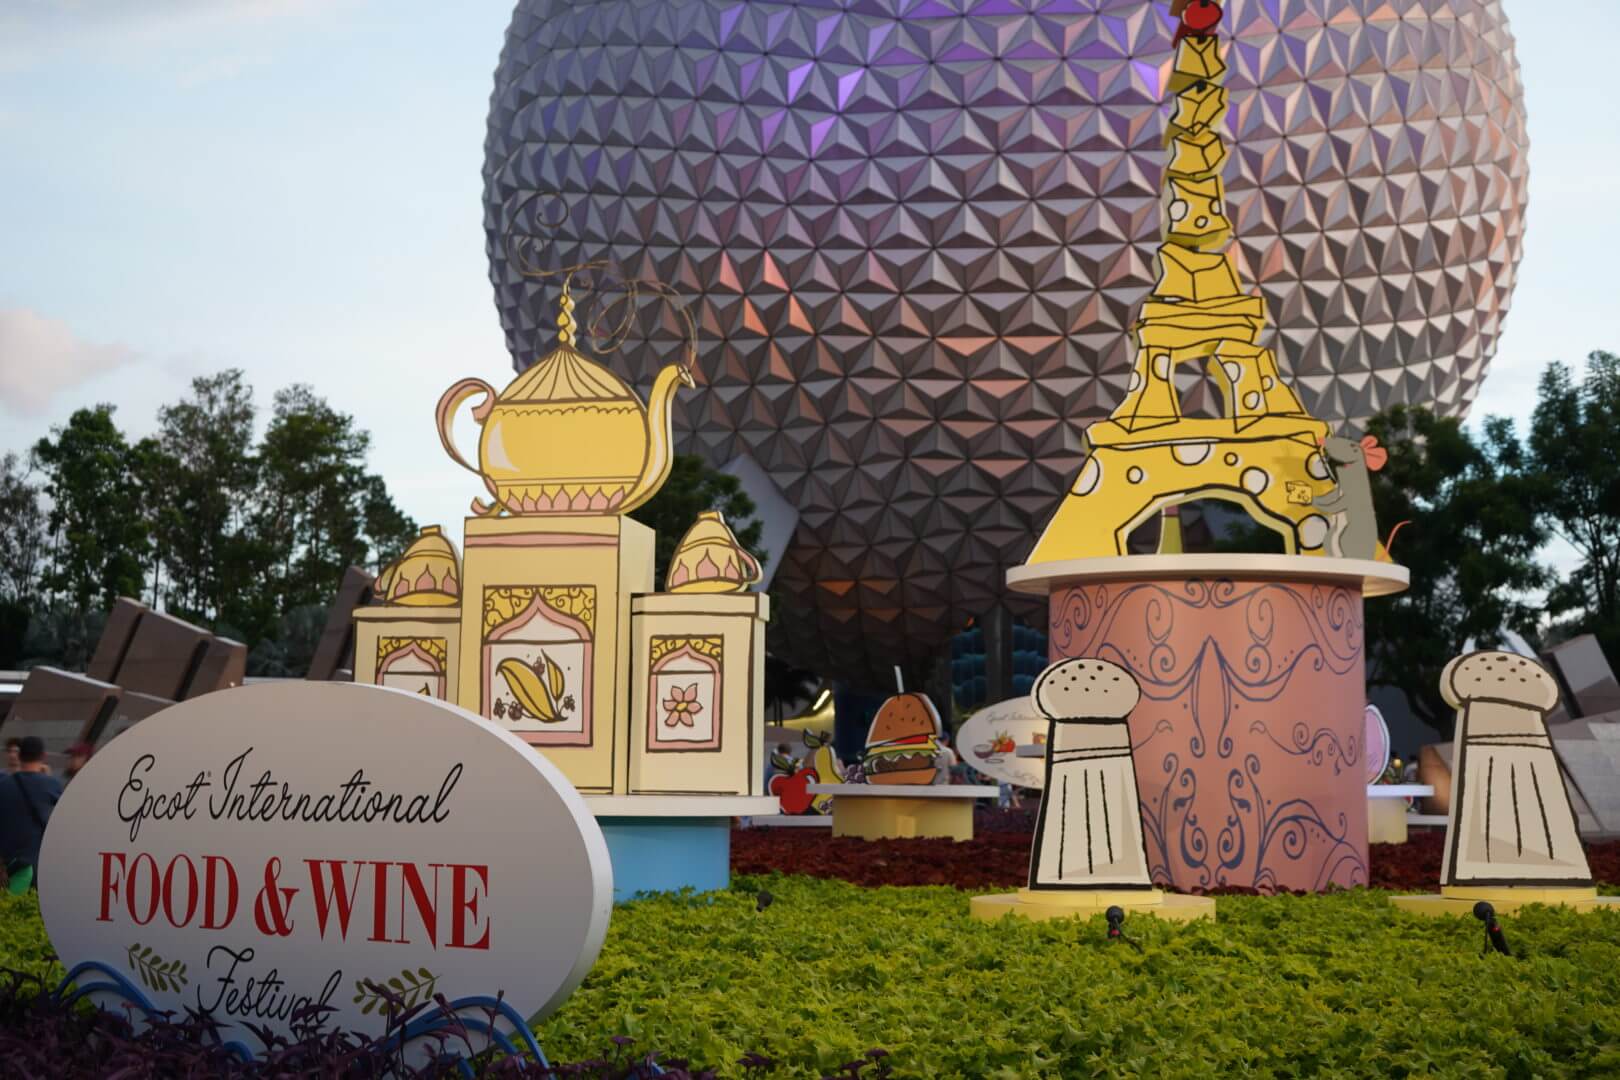 Spaceship Earth - Epcot Food and Wine Festival